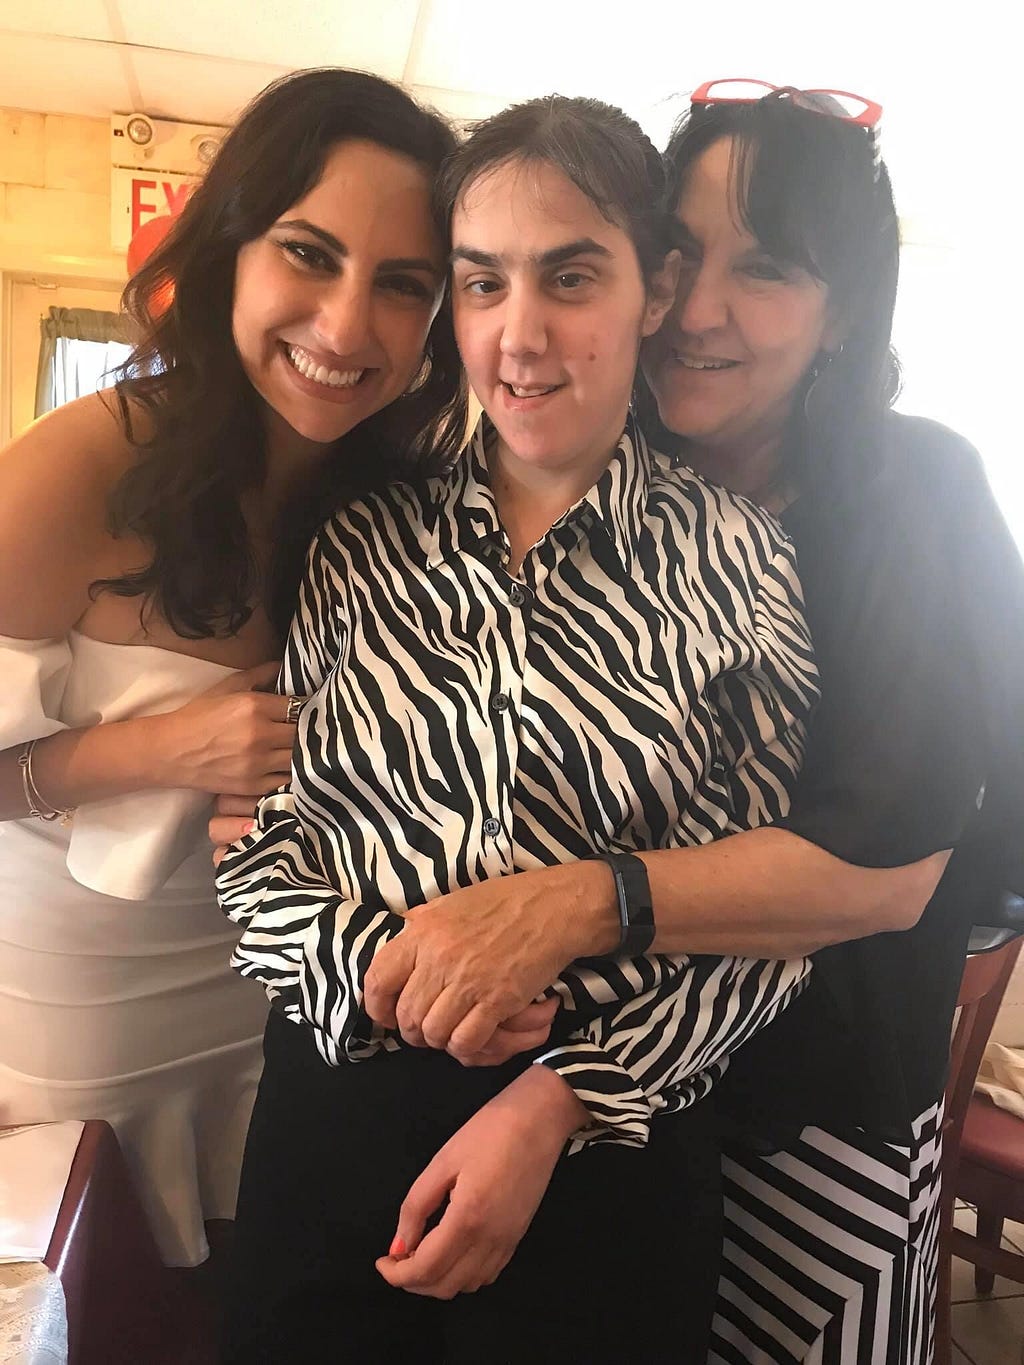 My sister, mom and me at my bridal shower.